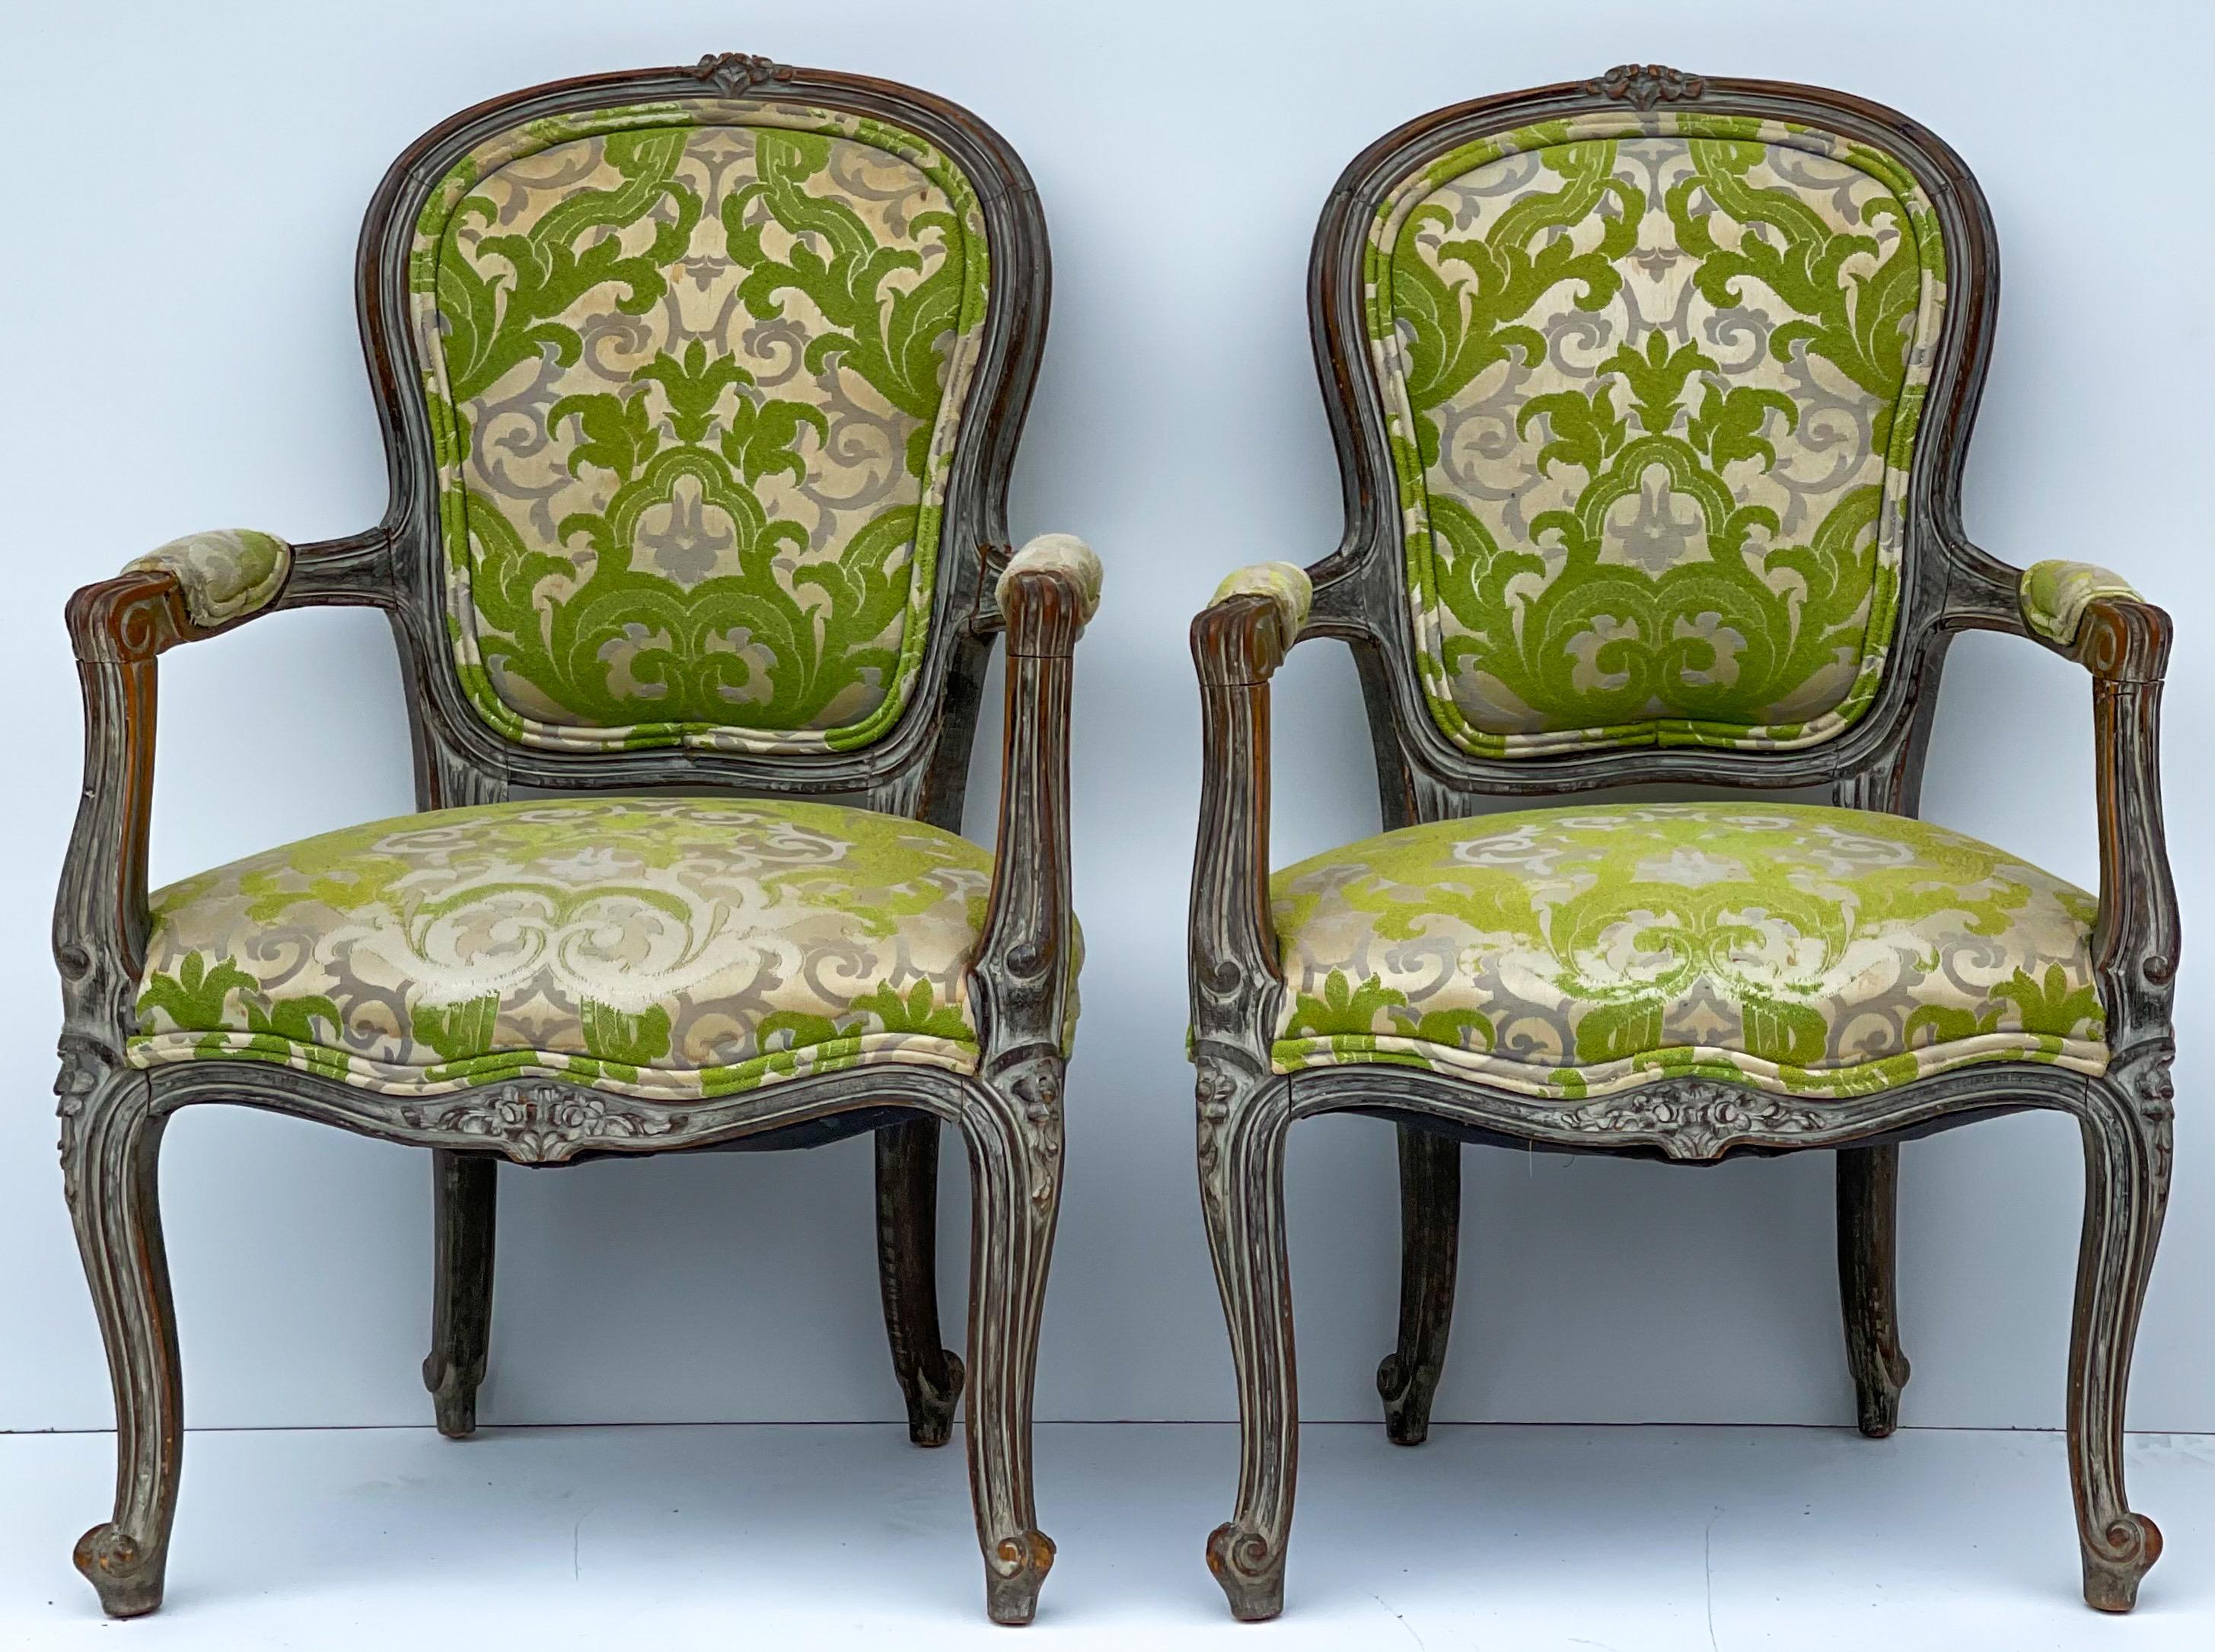 A holiday treat! This is a pair of early French Louis XVI style children’s chairs in vintage chartreuse damask. The gray frame is cerused and in very good condition. One seat shows notable wear but still striking!
 